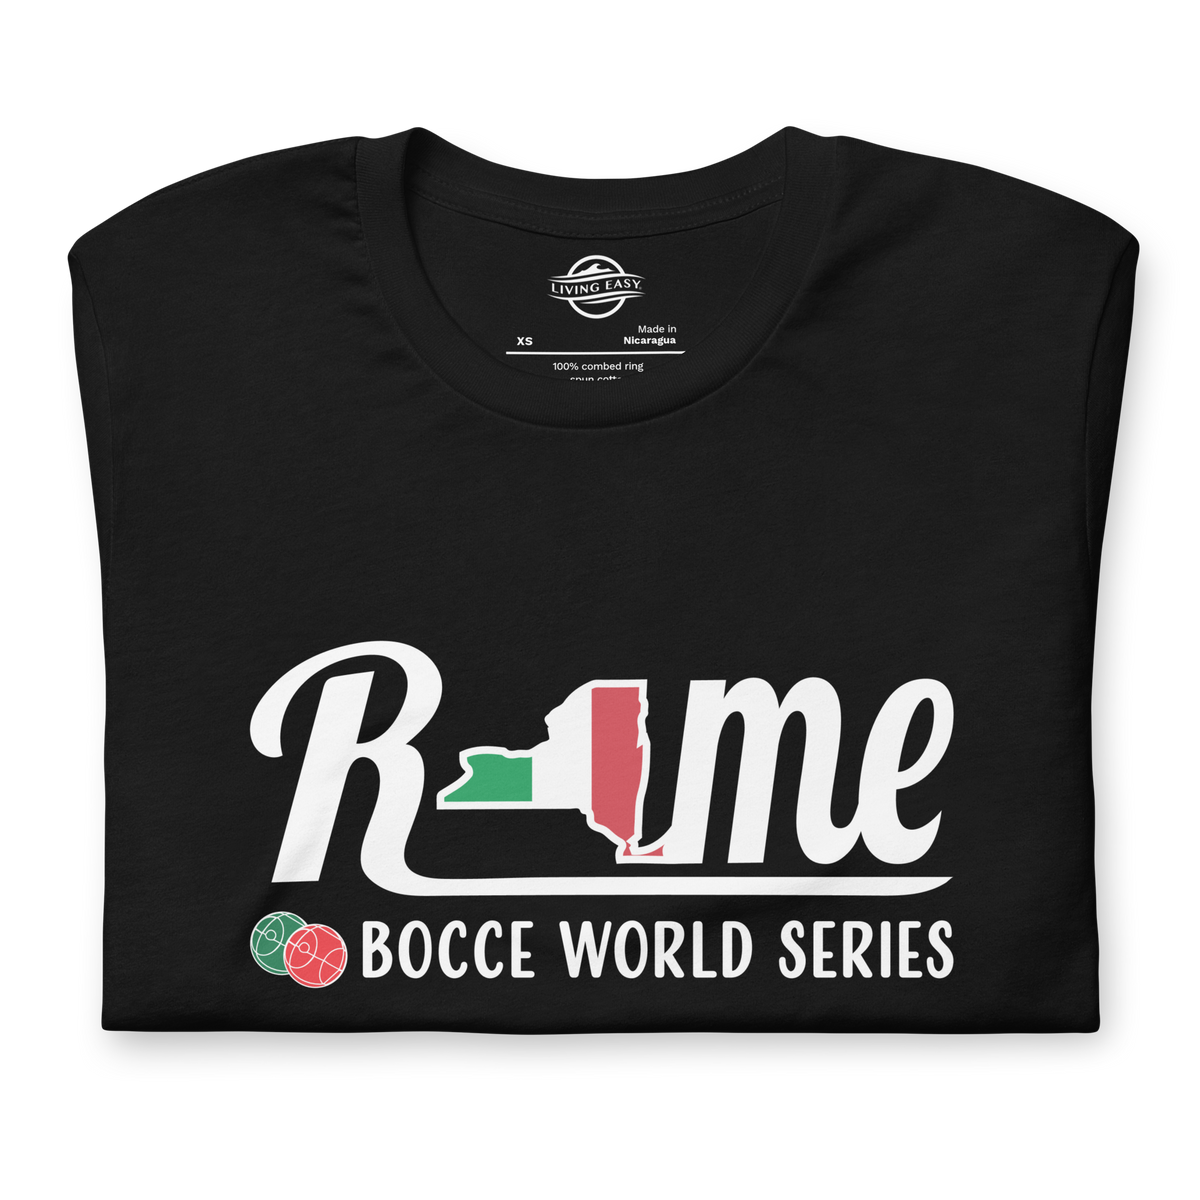 Rome Bocce World Series Tee - Living Easy®